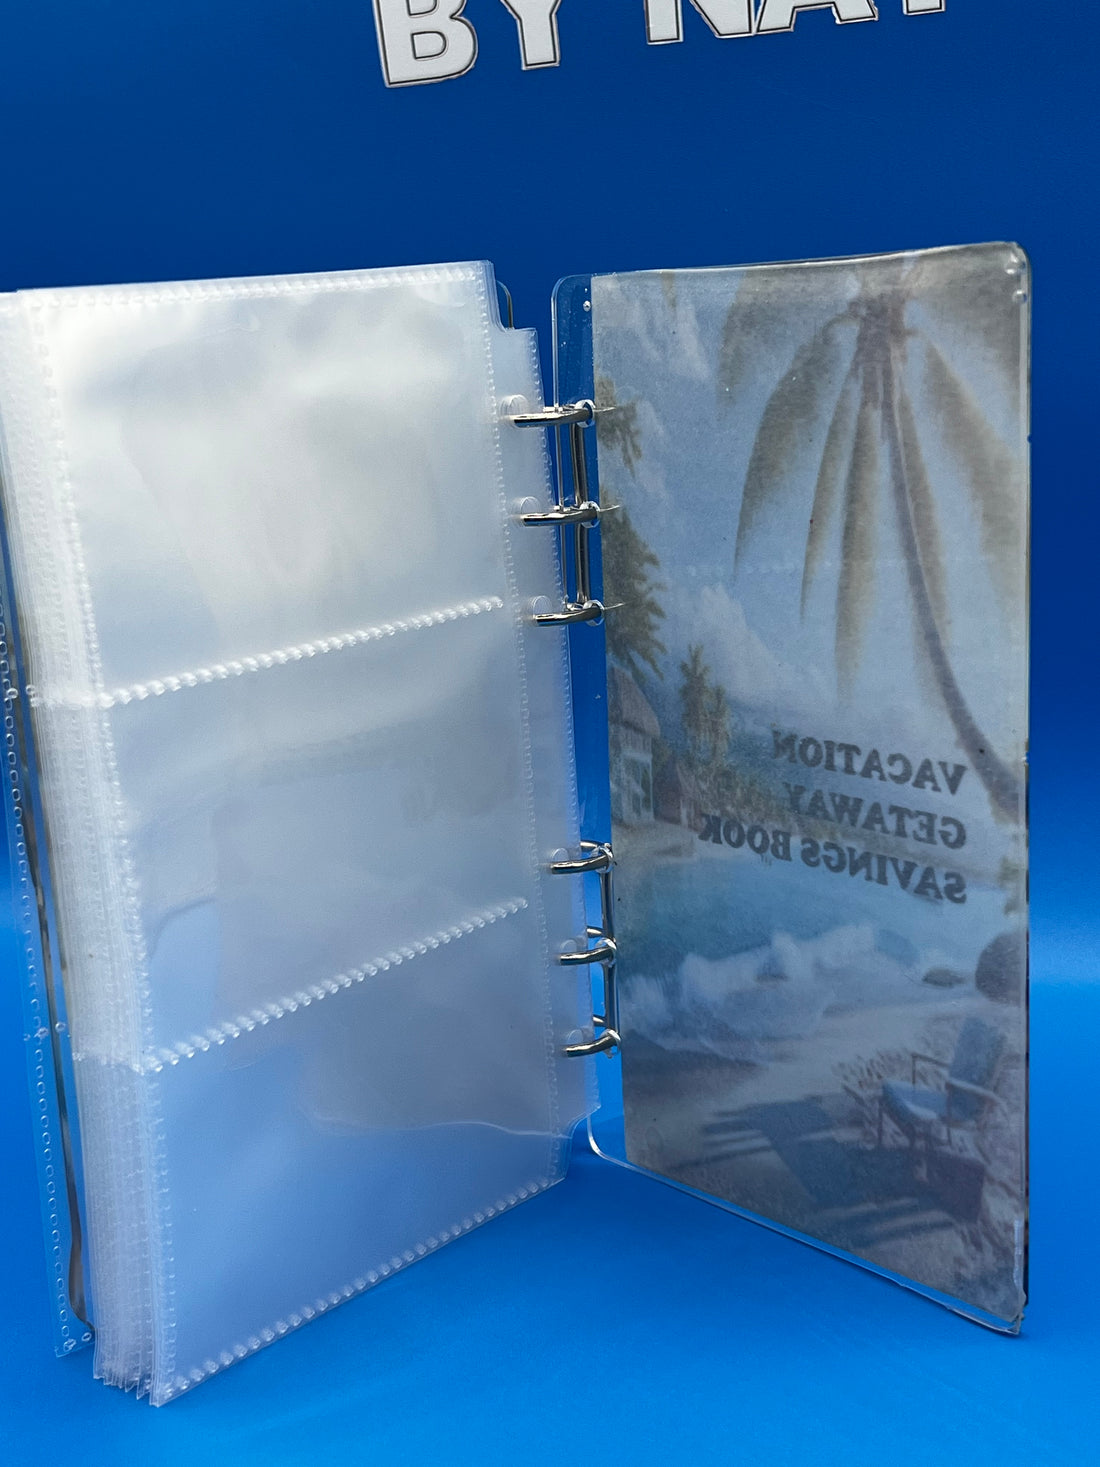 Vacation Savings Notebook with plastic pocket inserts